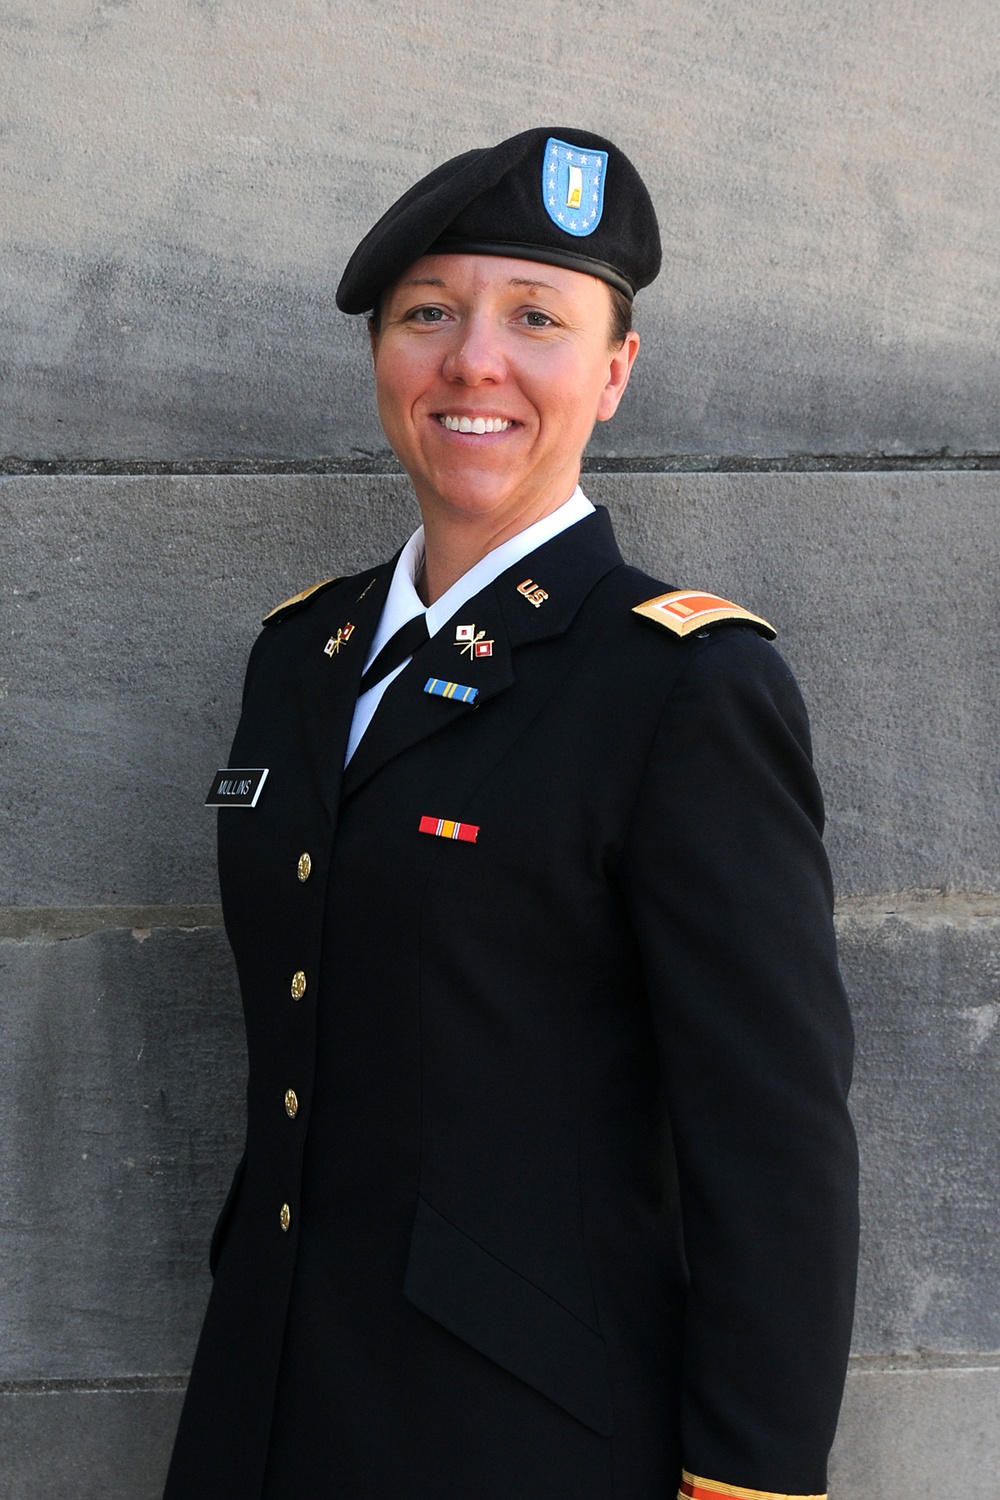 Female Soldier, trooper expands service to Commonwealth